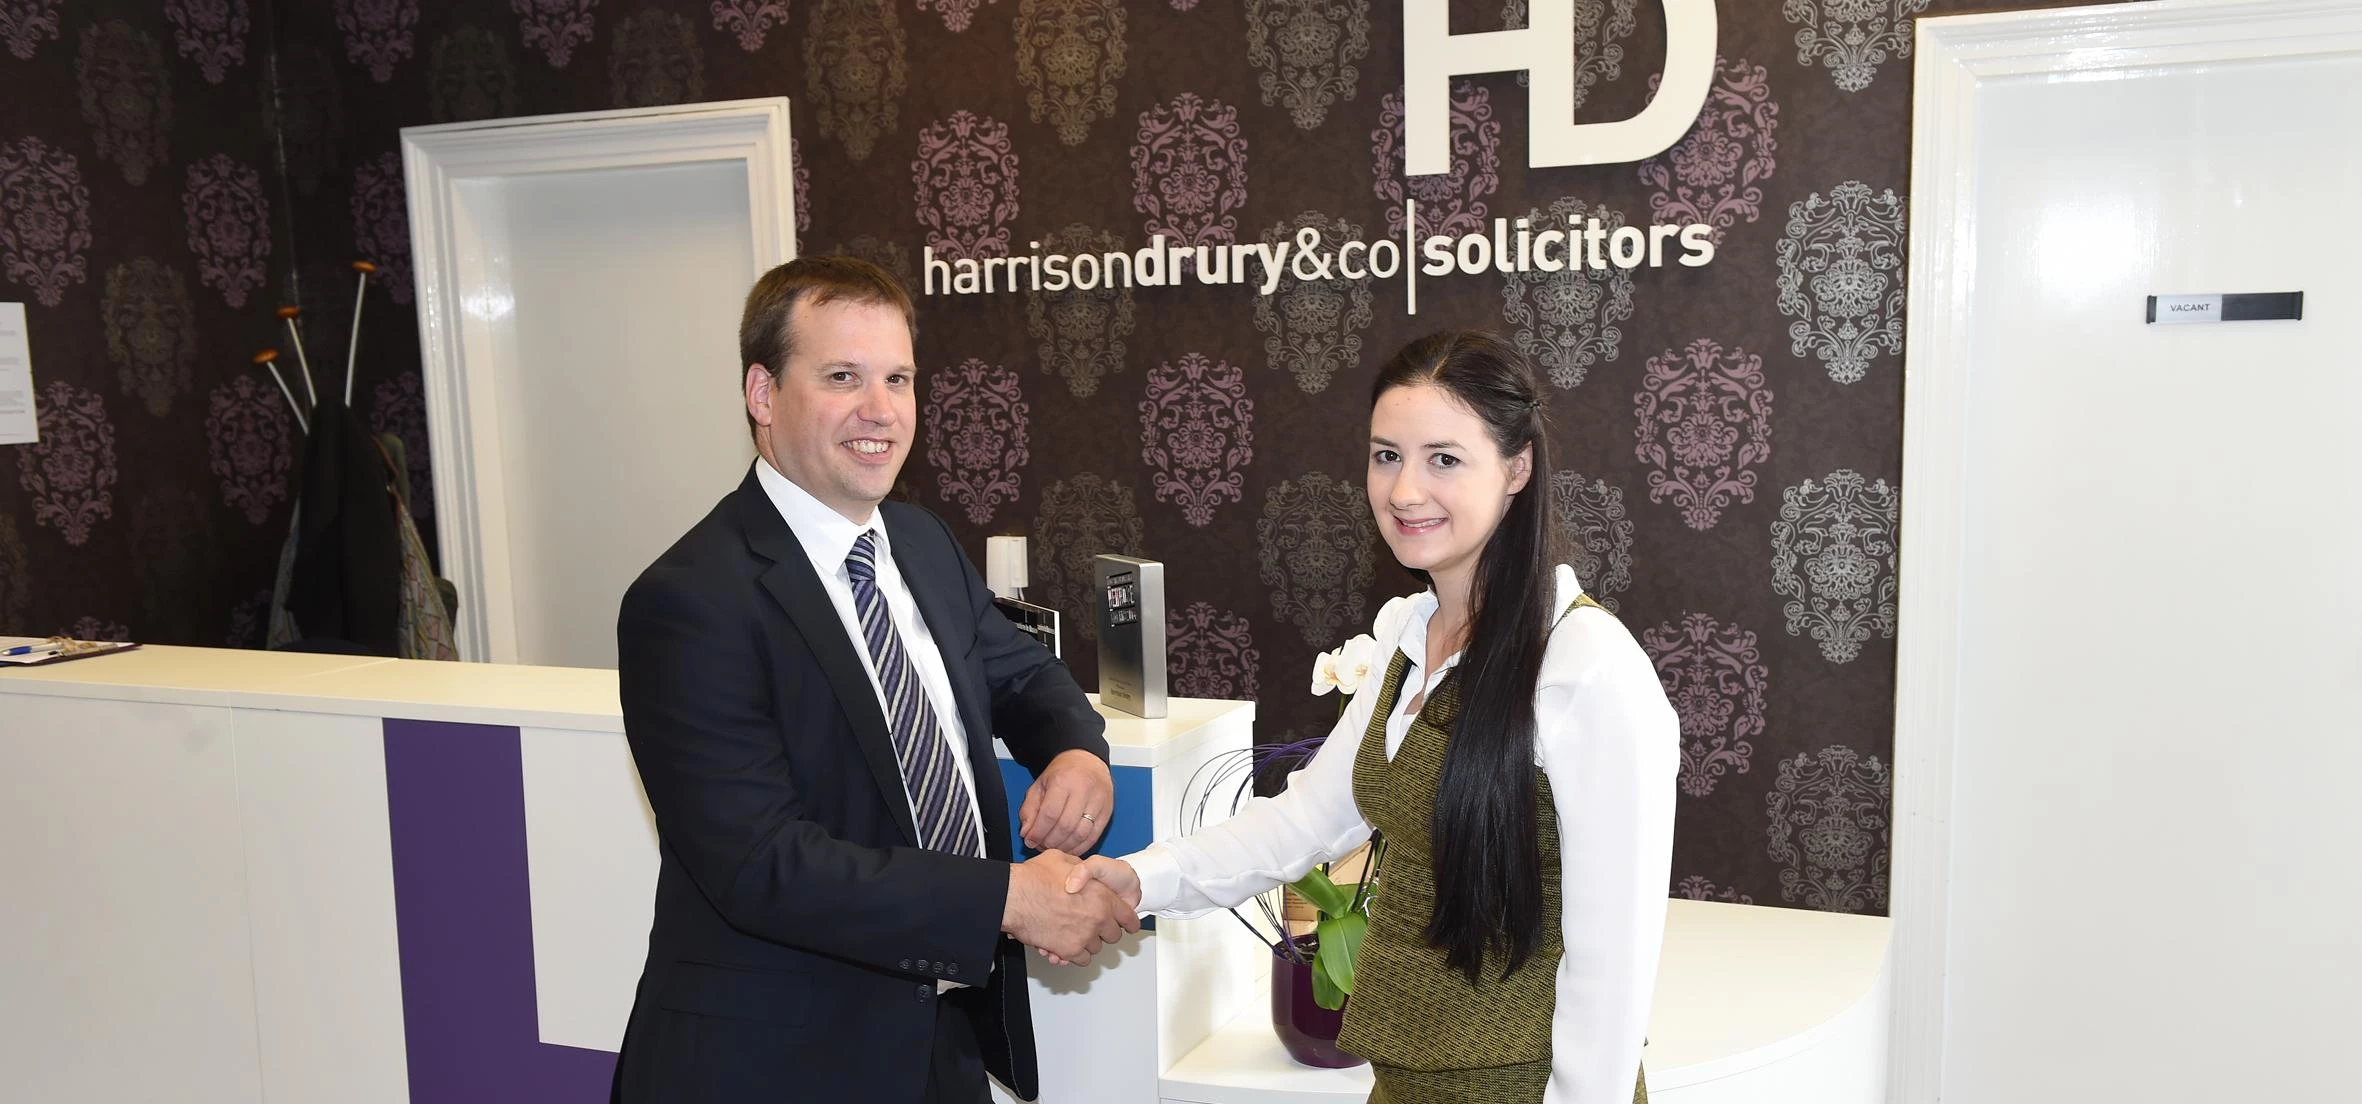 LR director Colin Fenny welcomes solicitor Helen Griffin to Harrison Drury